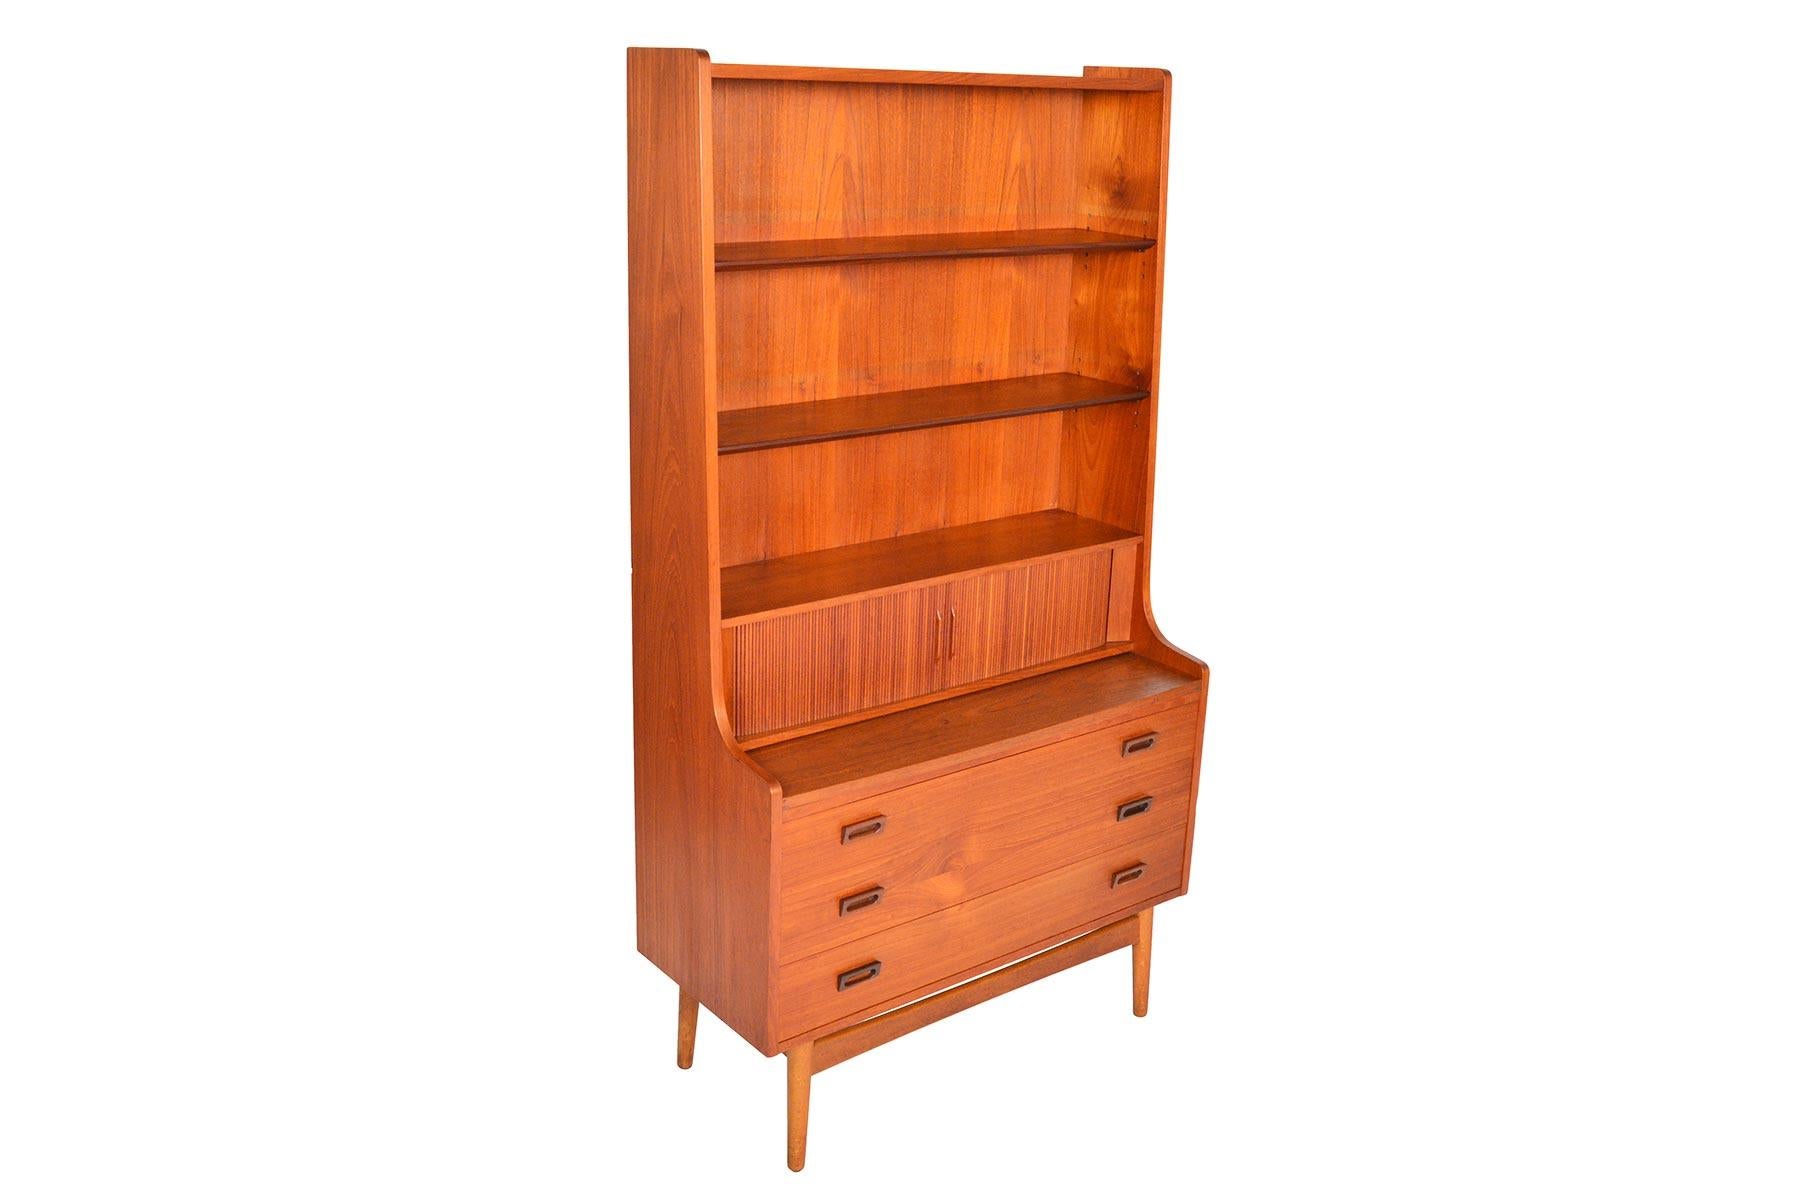 This beautiful Danish modern midcentury bookcase in teak was designed by Johannes Sorth for Bornholm Møbelfabrik, Nexø in the 1960s. The tall, upper hutch features three adjustable shelves. The lower cabinet offers three large drawers for plenty of